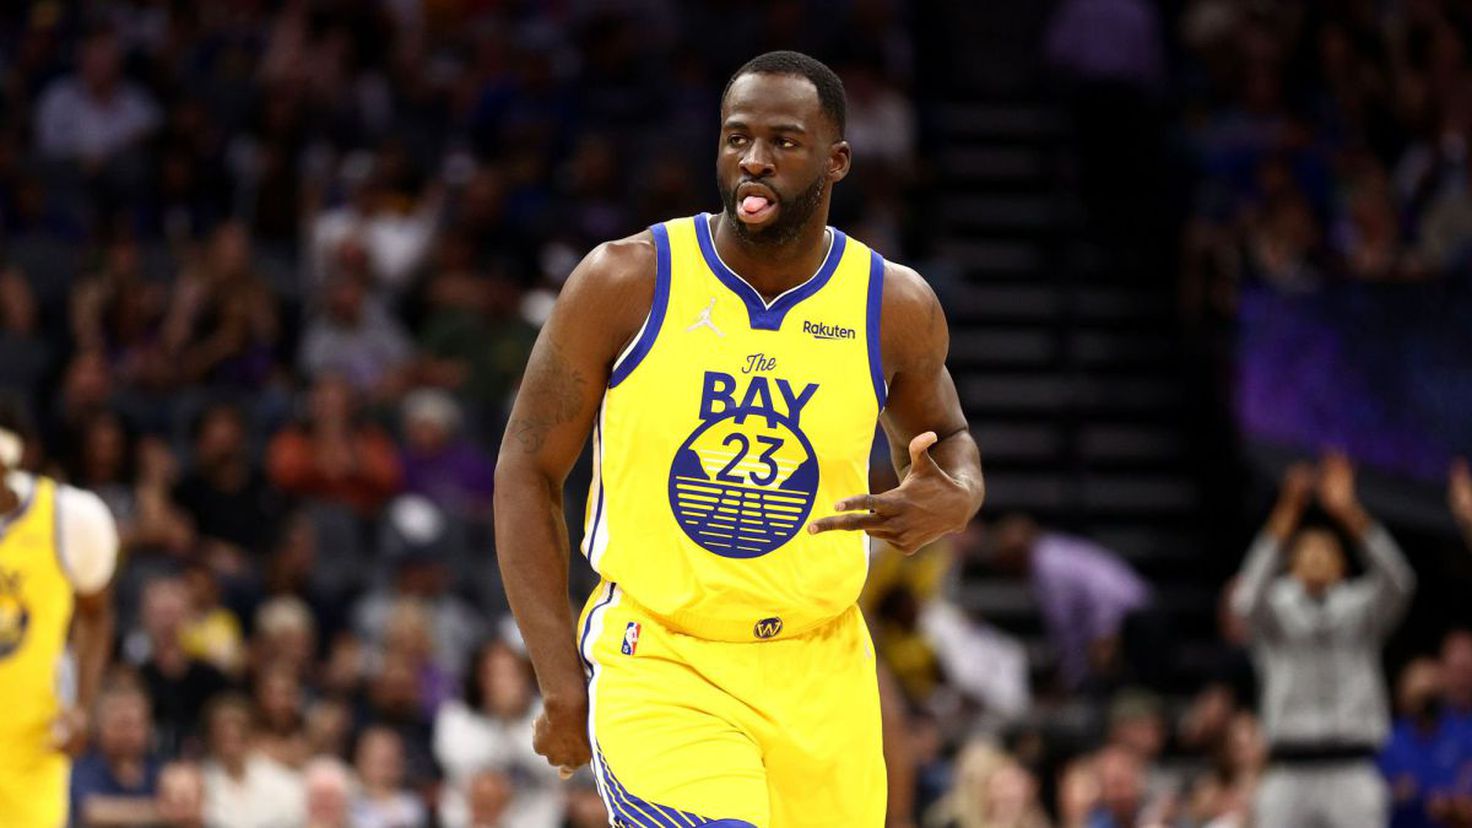 Draymond Green stays at home
